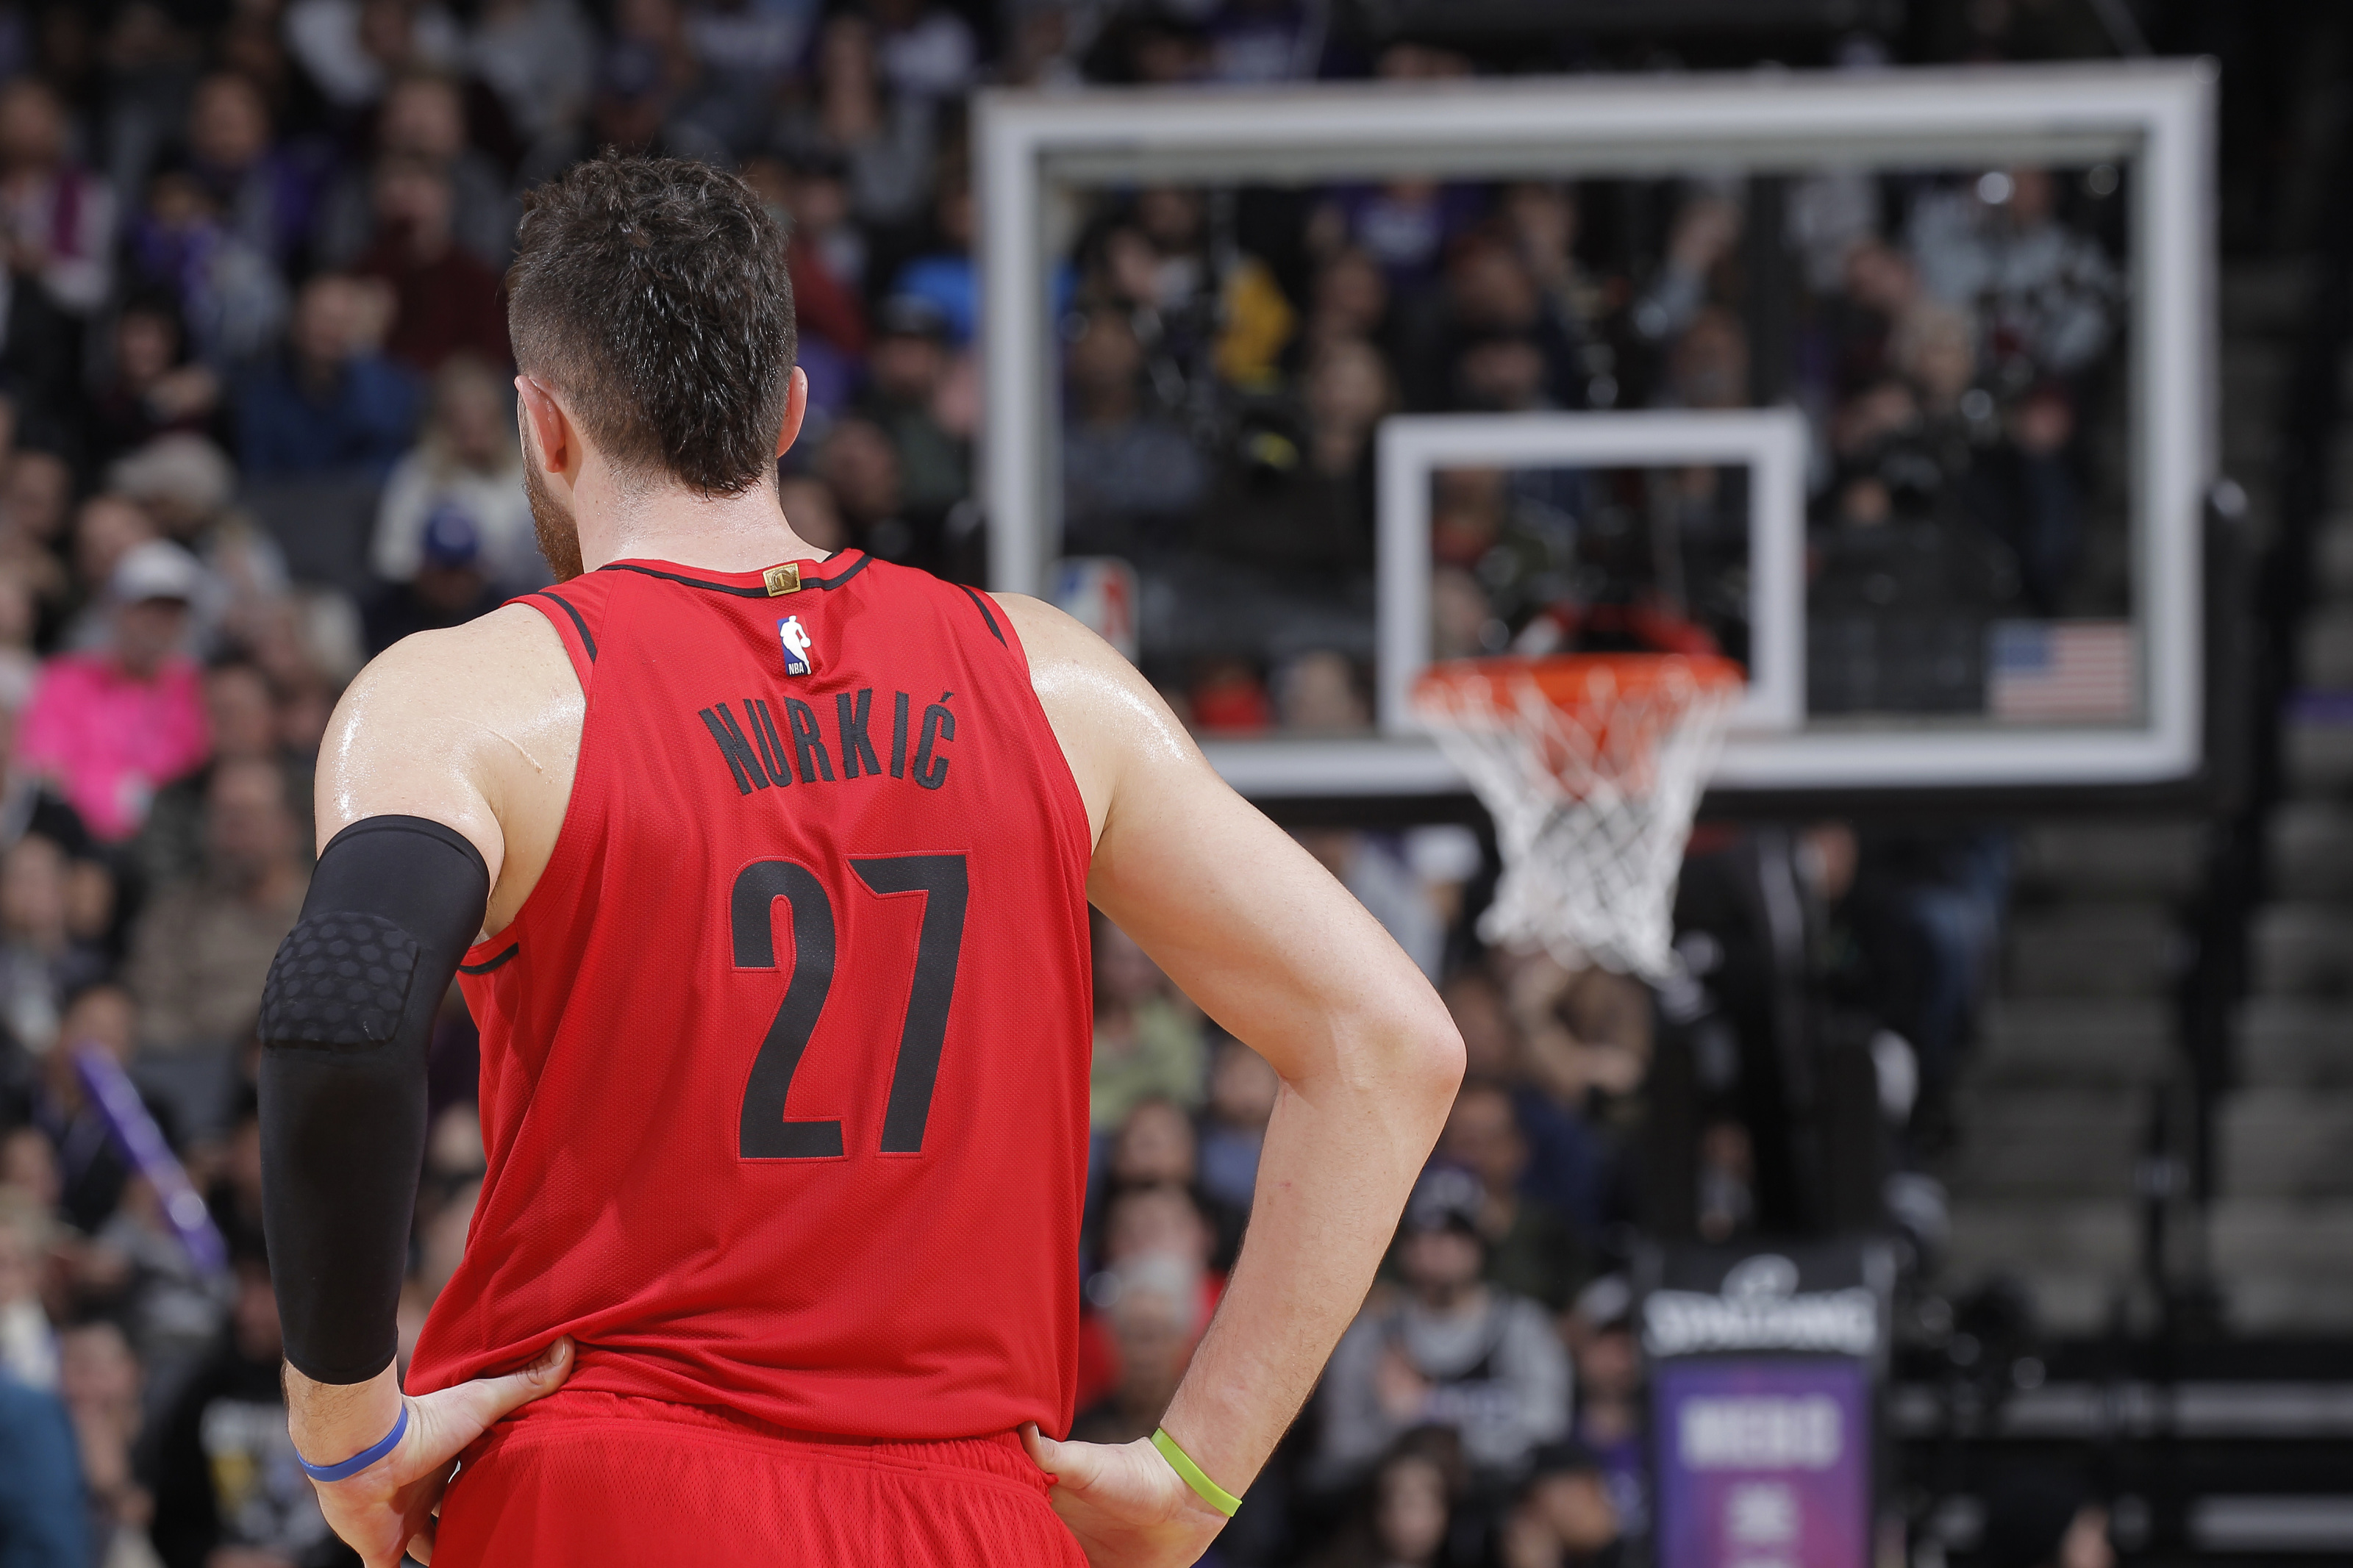 Diving into the Portland Trail-Blazers roster: Jusuf Nurkic